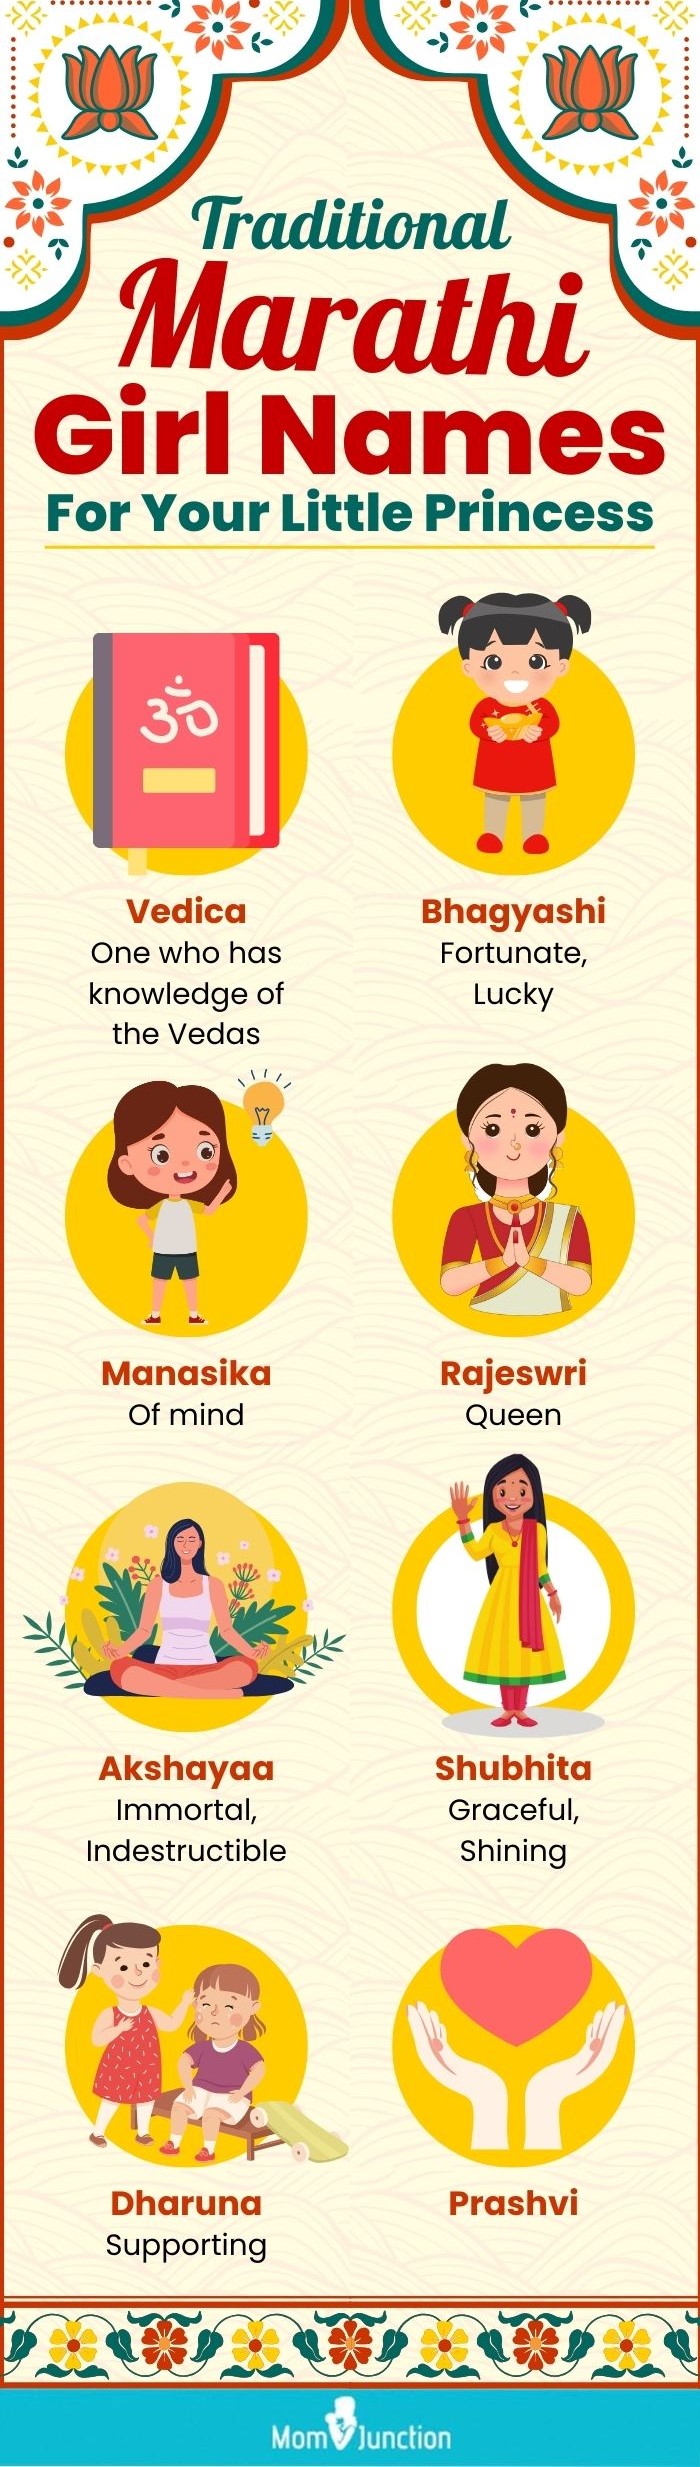 traditional marathi girl names for your little princess (infographic)